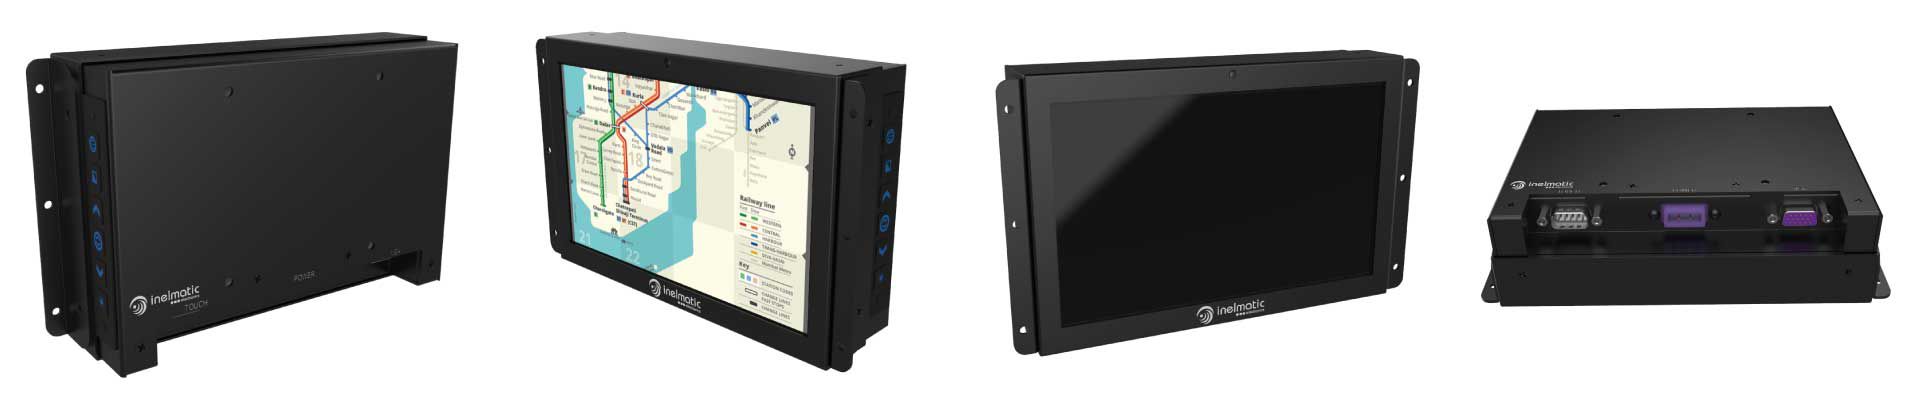 7 inches rugged display - Inelmatic